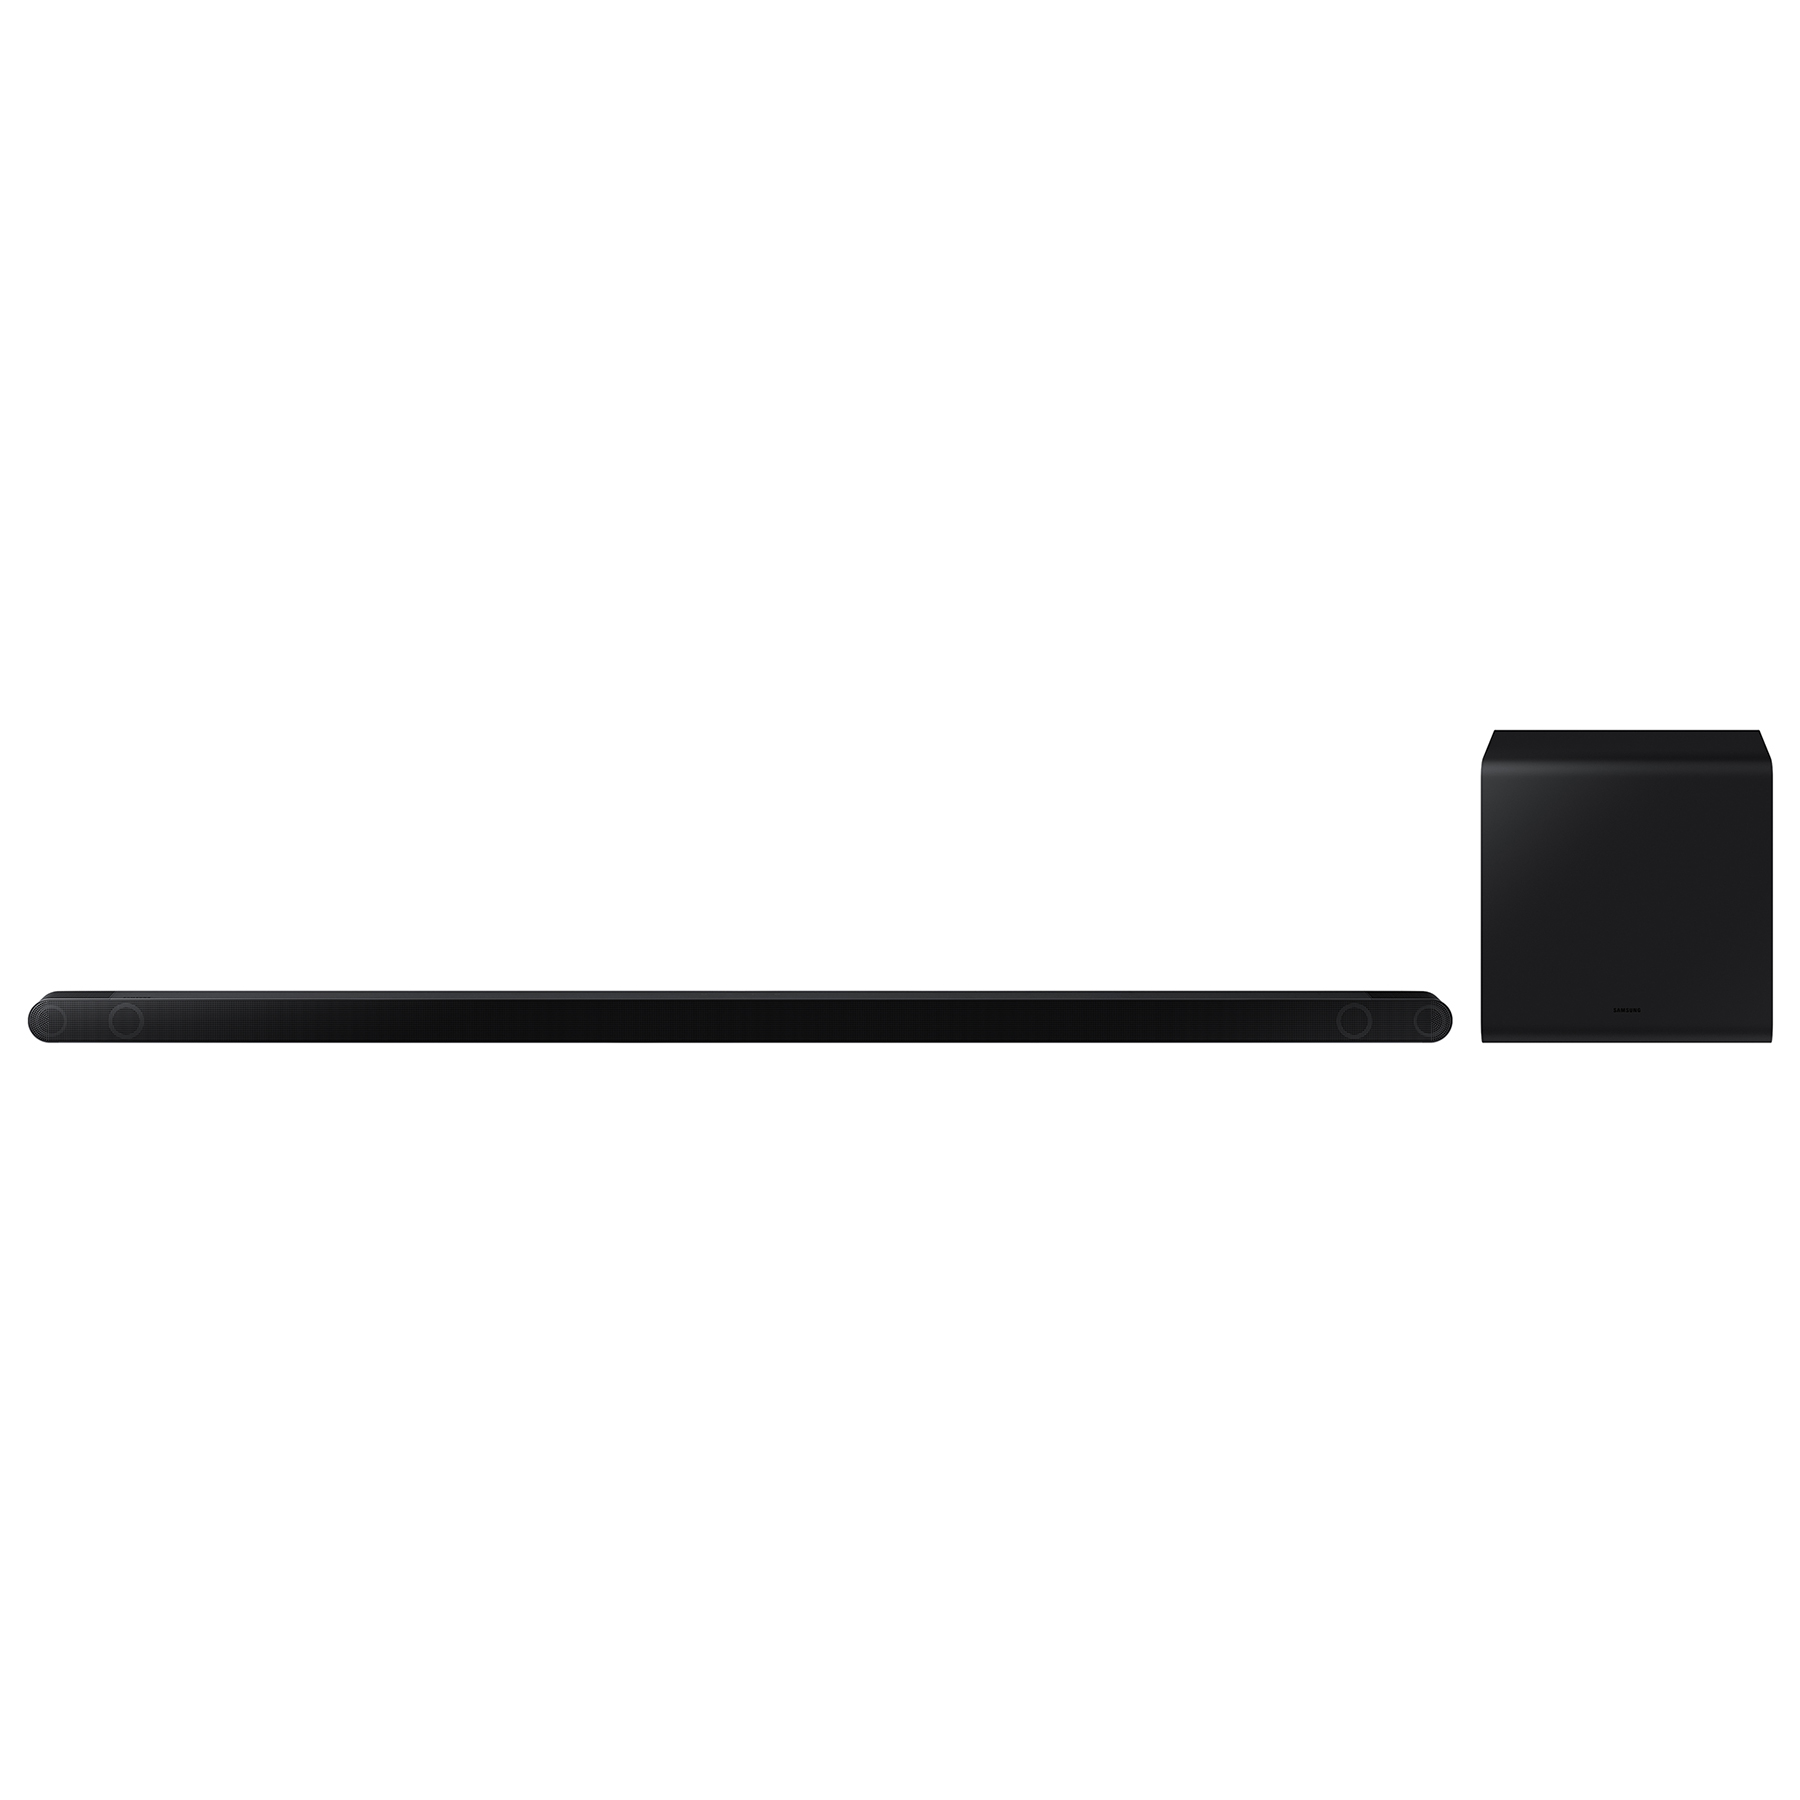 Image of Samsung HW S800B 3 1 2 Ch Dolby Atmos Soundbar with Subwoofer in Black